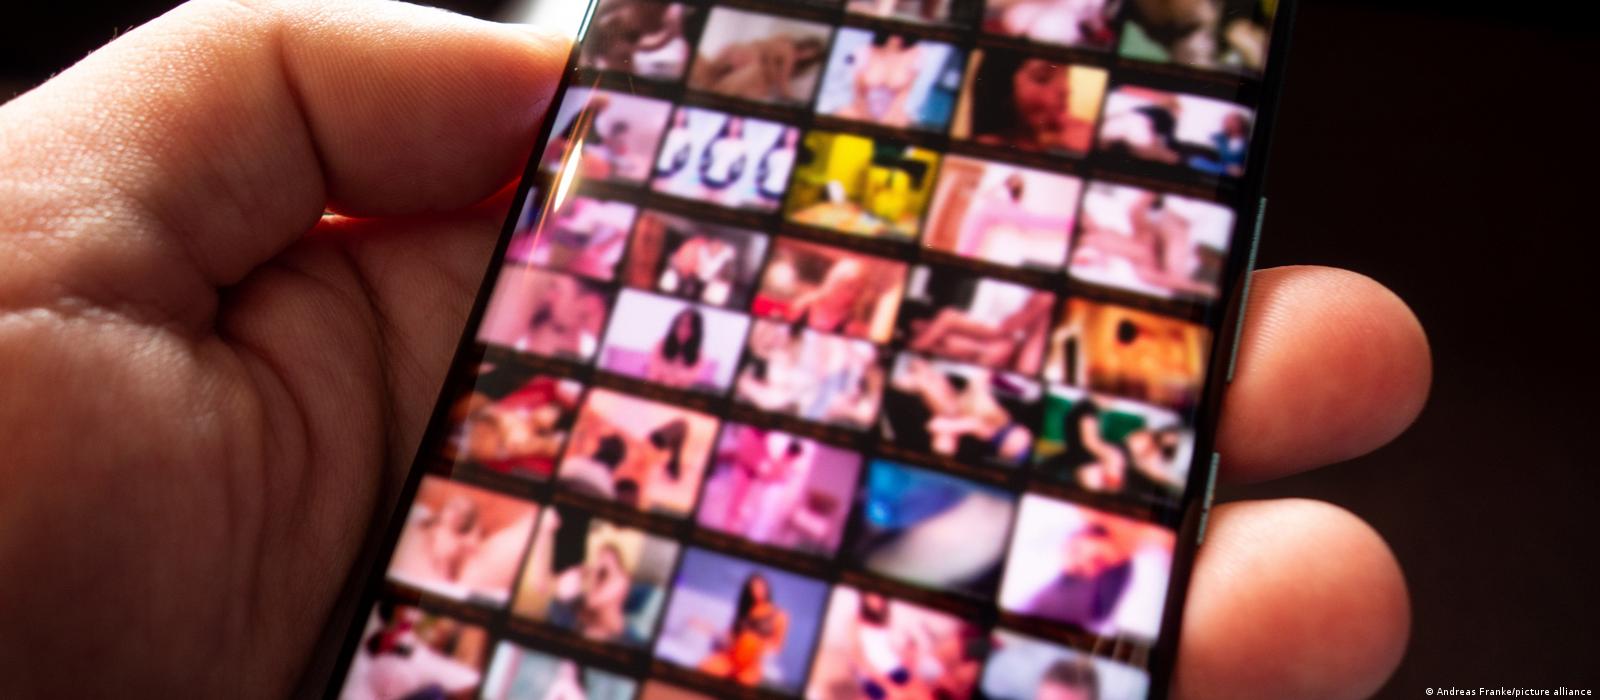 Online pornography messes up the minds of minors: experts â€“ DW â€“ 04/08/2023